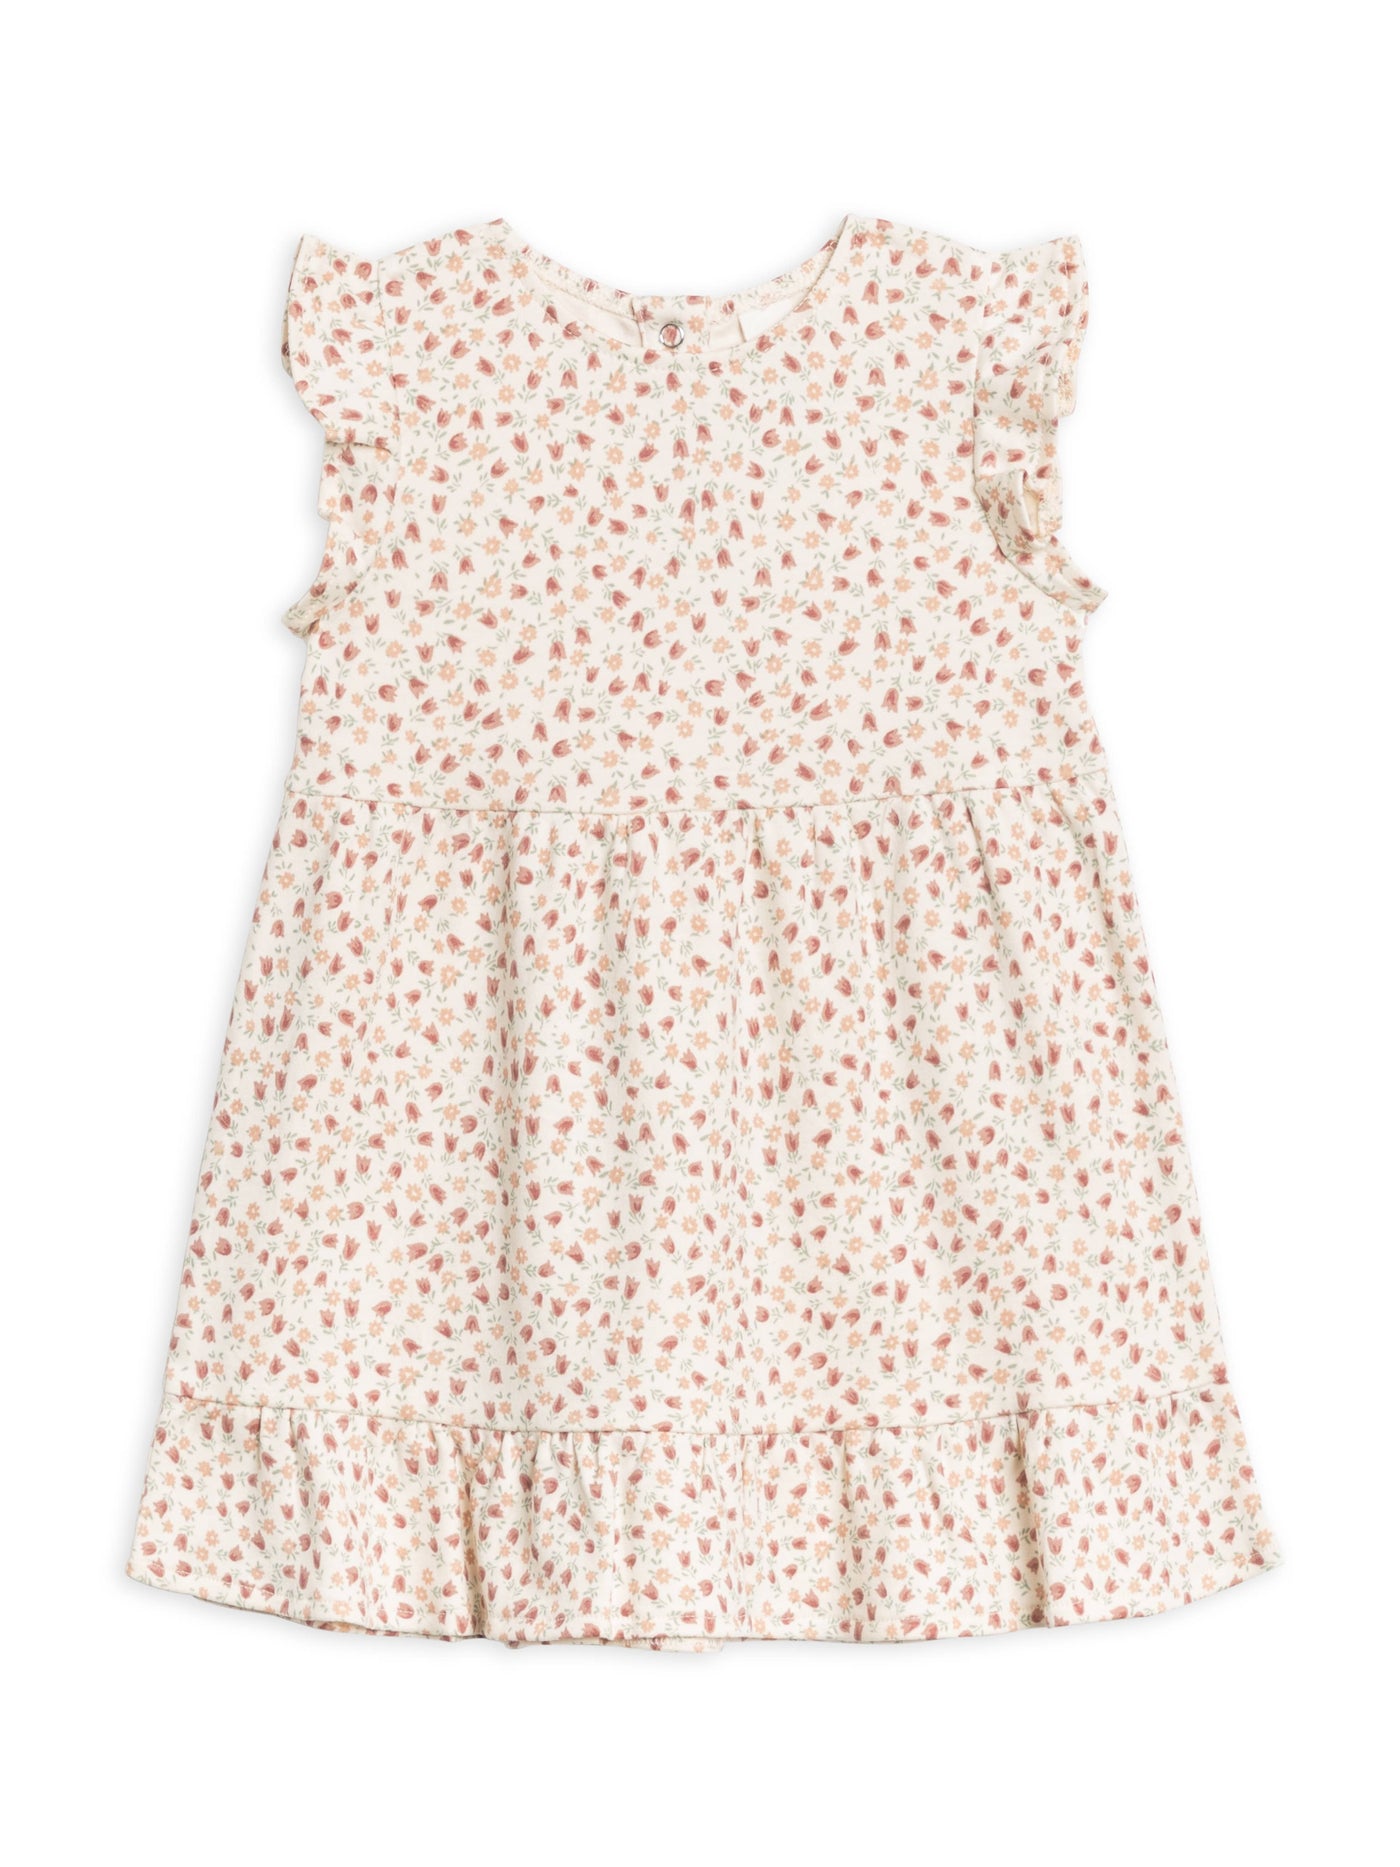 Colored Organics Organic Baby & Kids Tilly Tiered Dress - Joy Floral - Simple Good